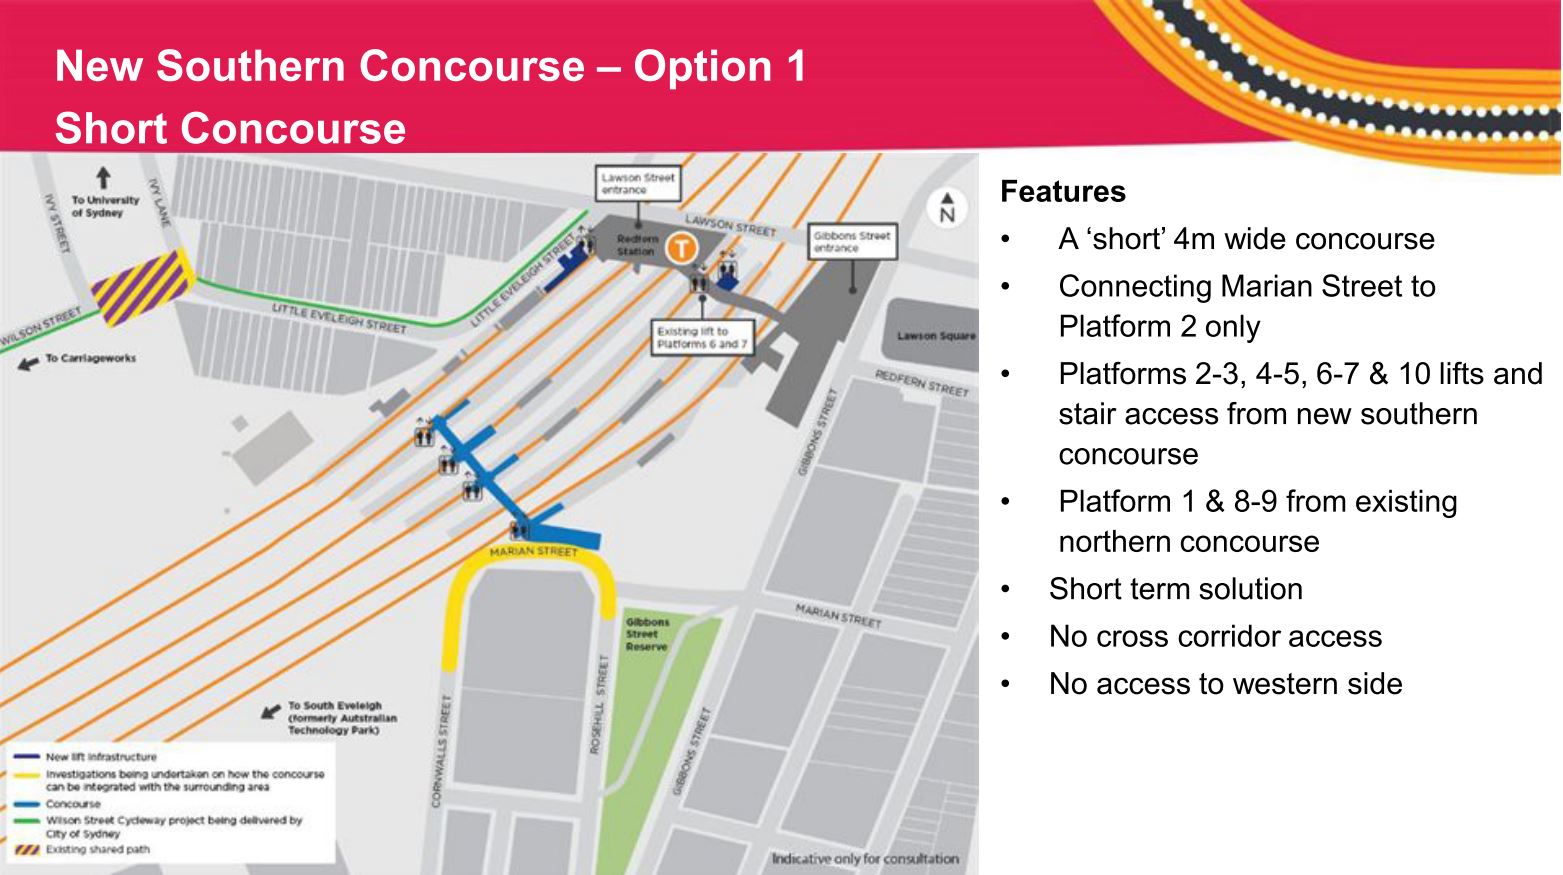 Redfern Station Option for Short Southern Concourse 2019